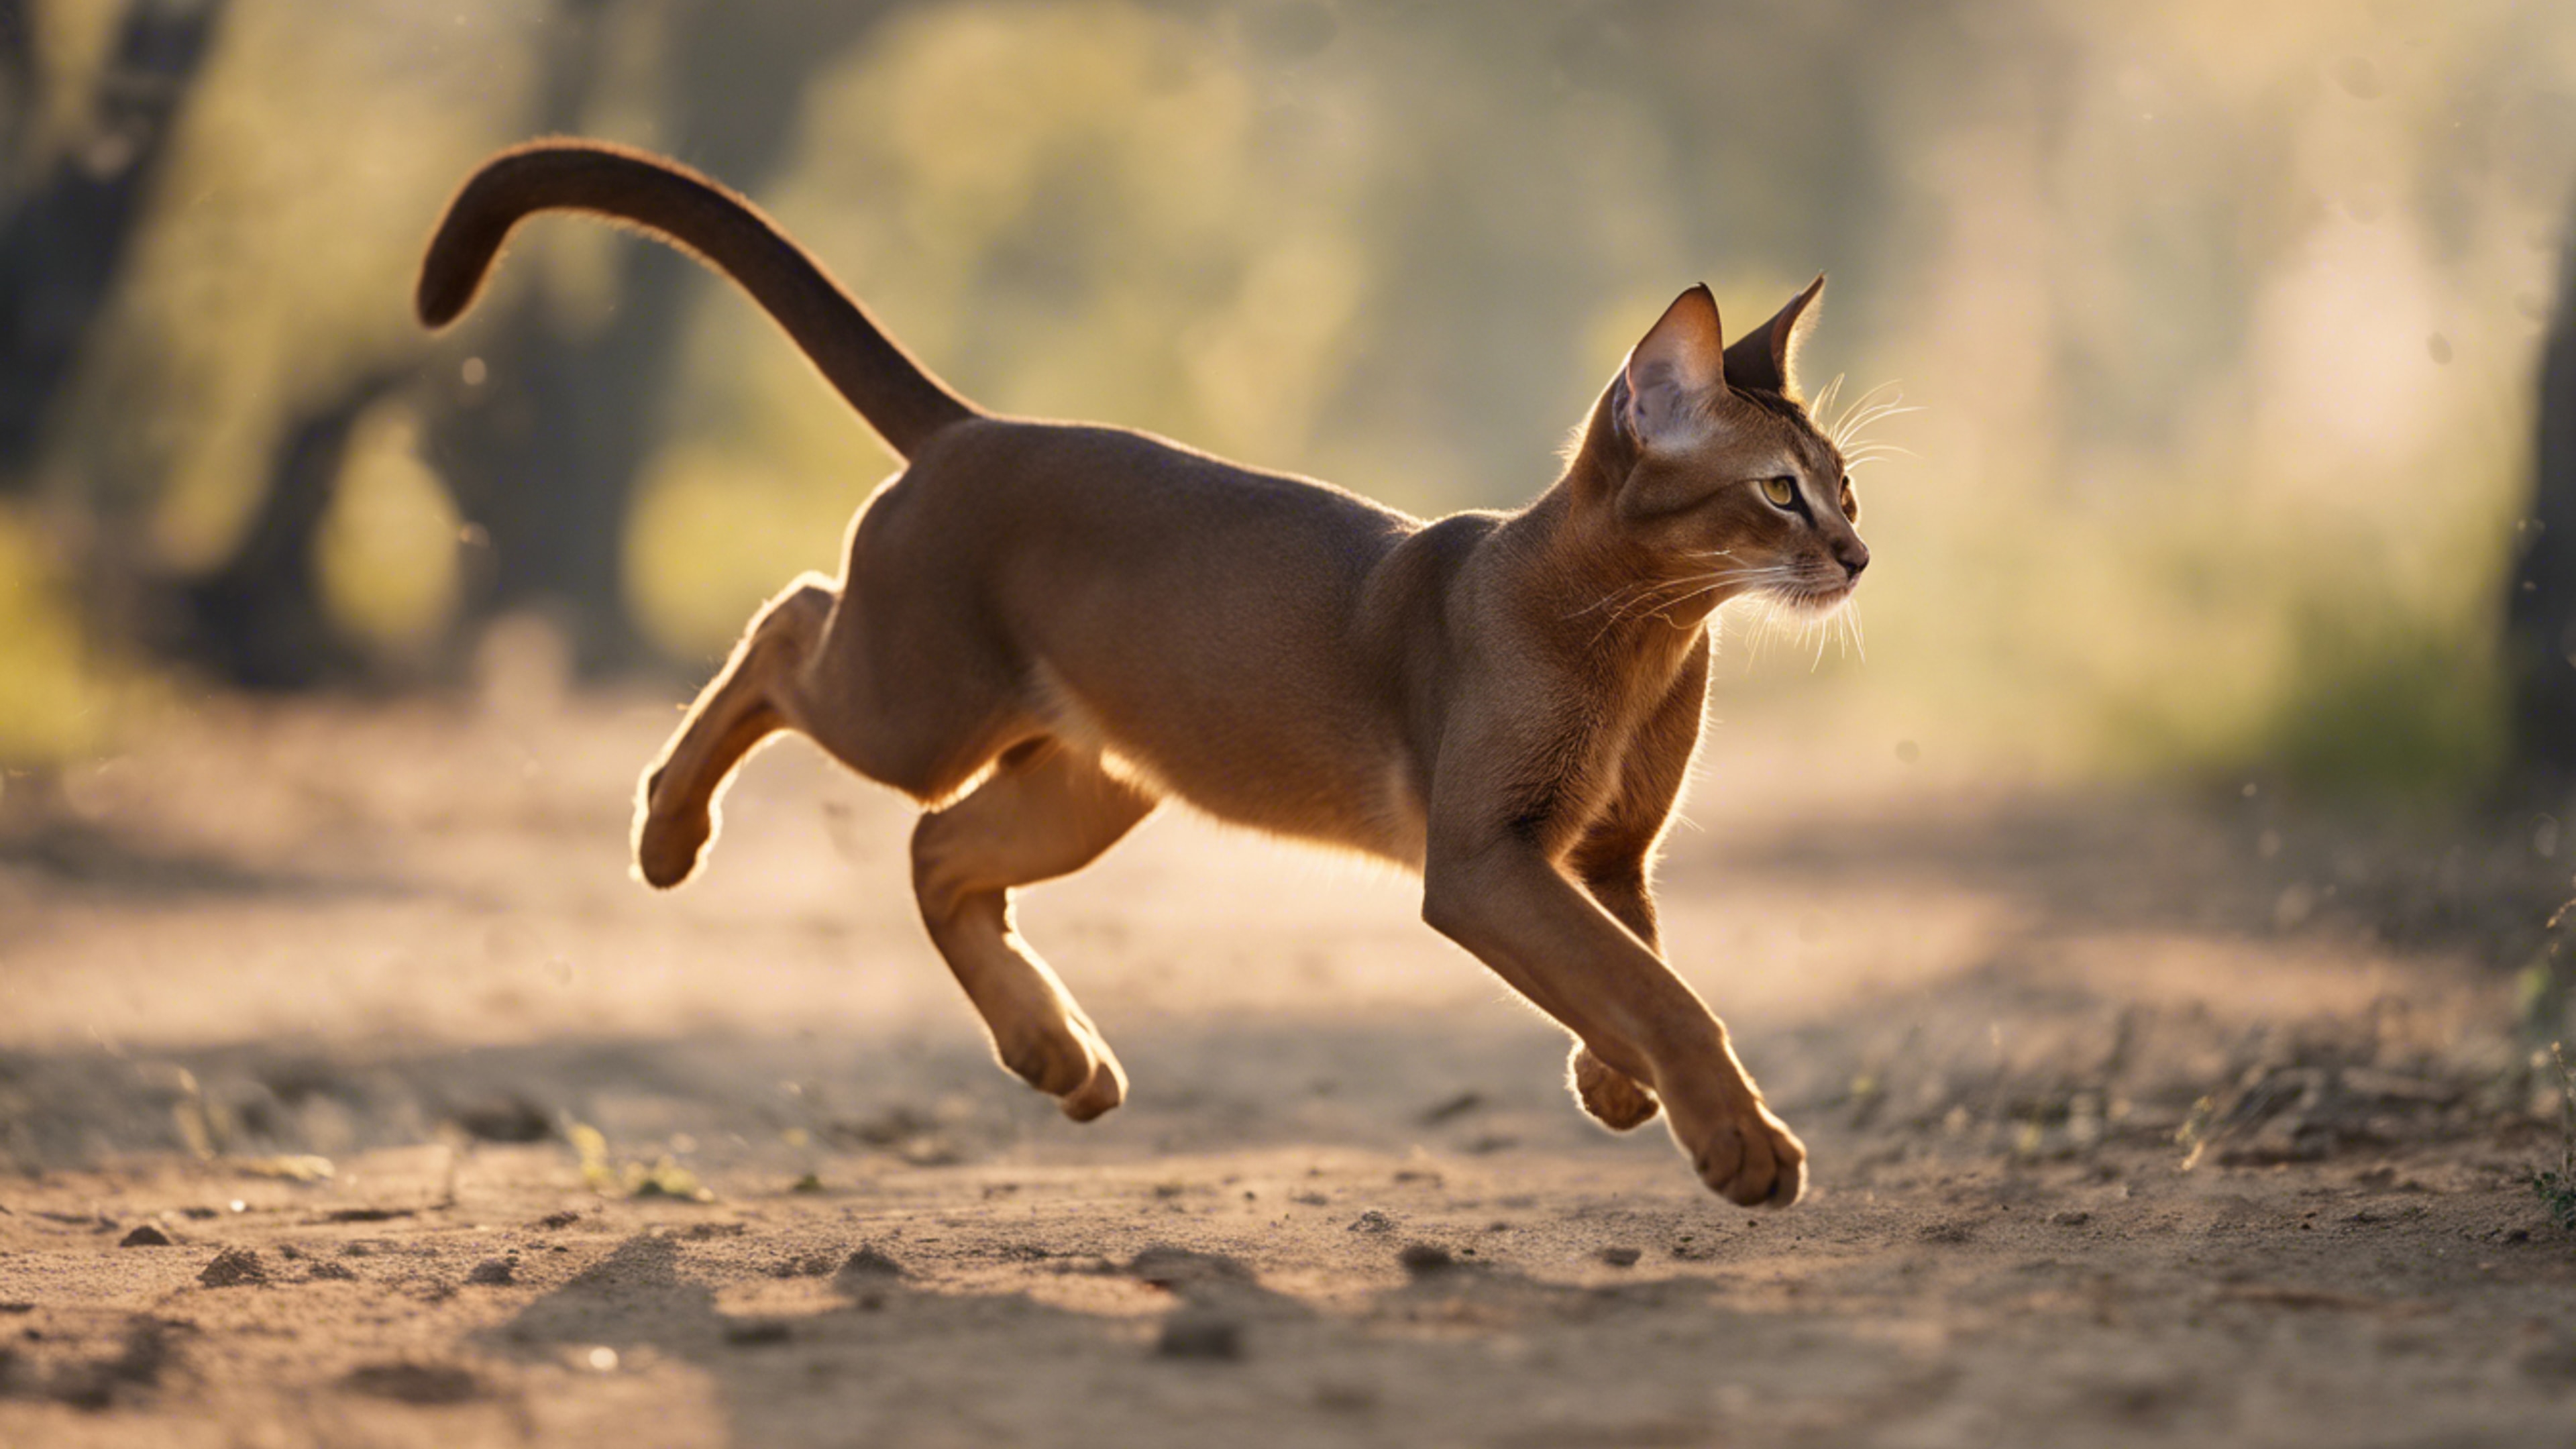 A graceful Abyssinian in the midst of a powerful leap, chasing after an elusive laser pointer dot. Wallpaper[96ede32971e845549726]